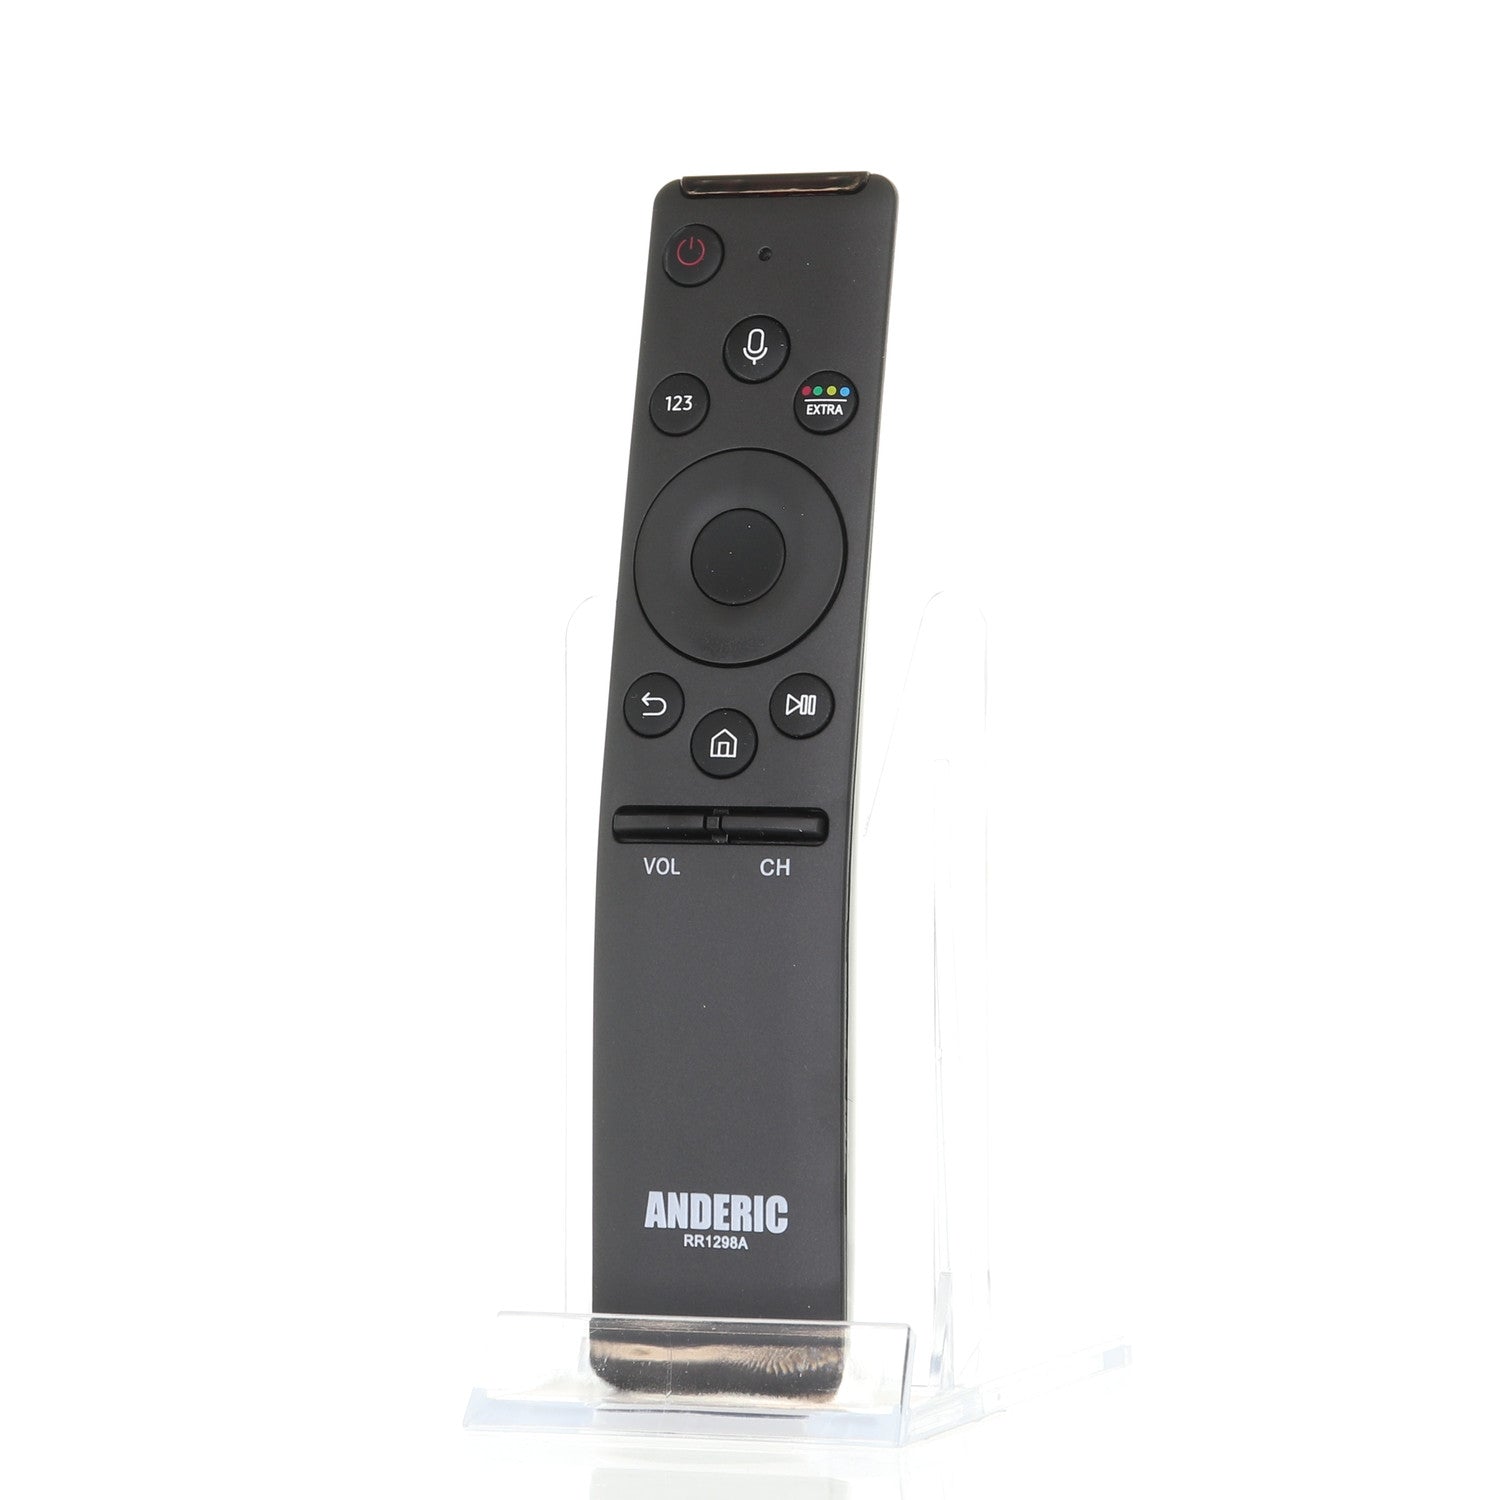 RR1298A Remote Control for Samsung® Smart TVs with Voice Control